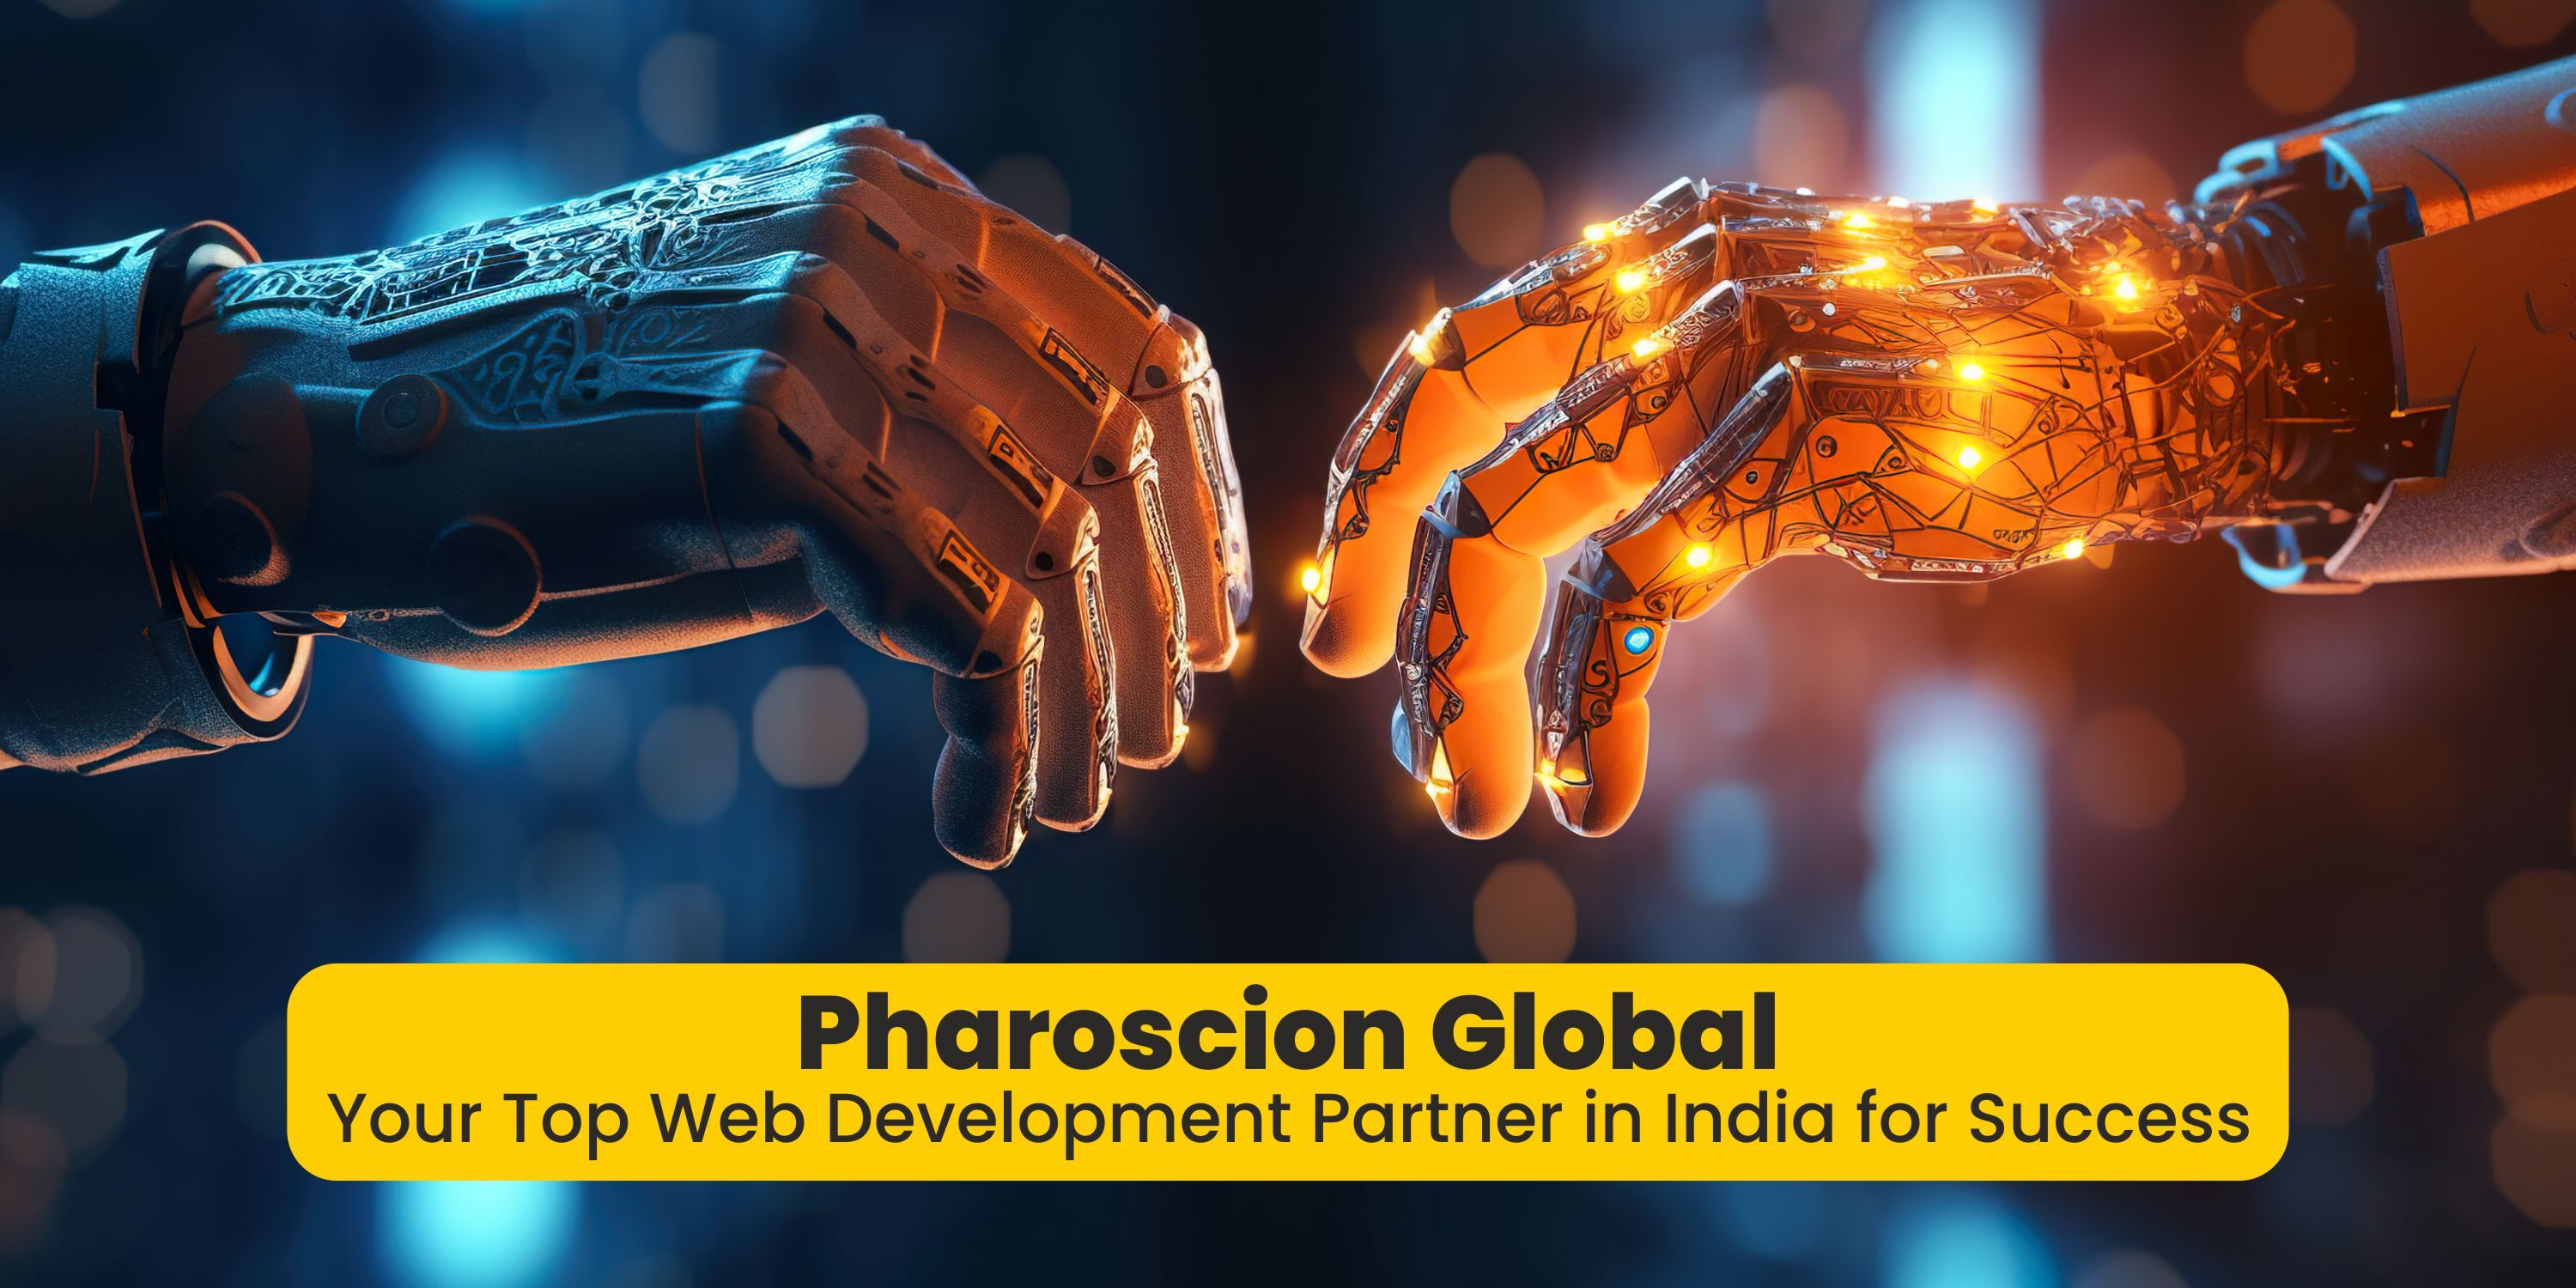 Pharoscion Global: Your Top Web Development Partner in India for Success